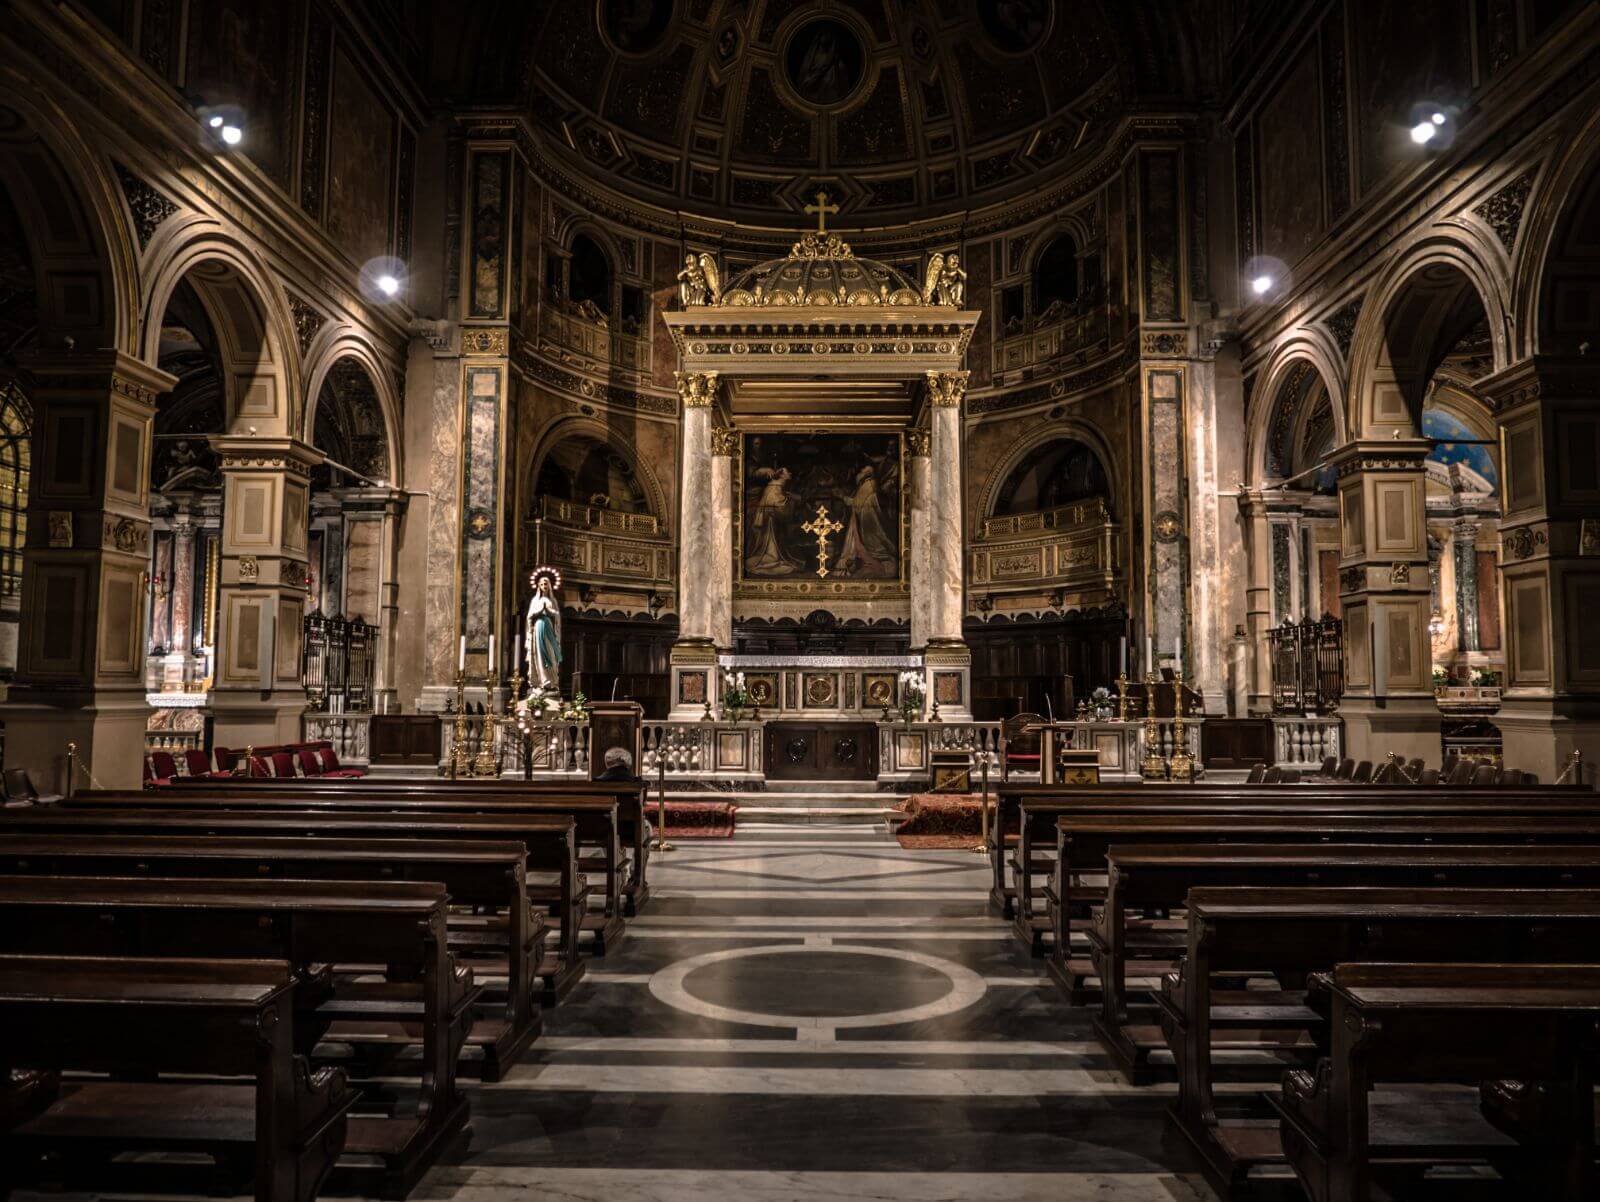 cathedral-interior-religious-with-benches-empty-in-back-218480